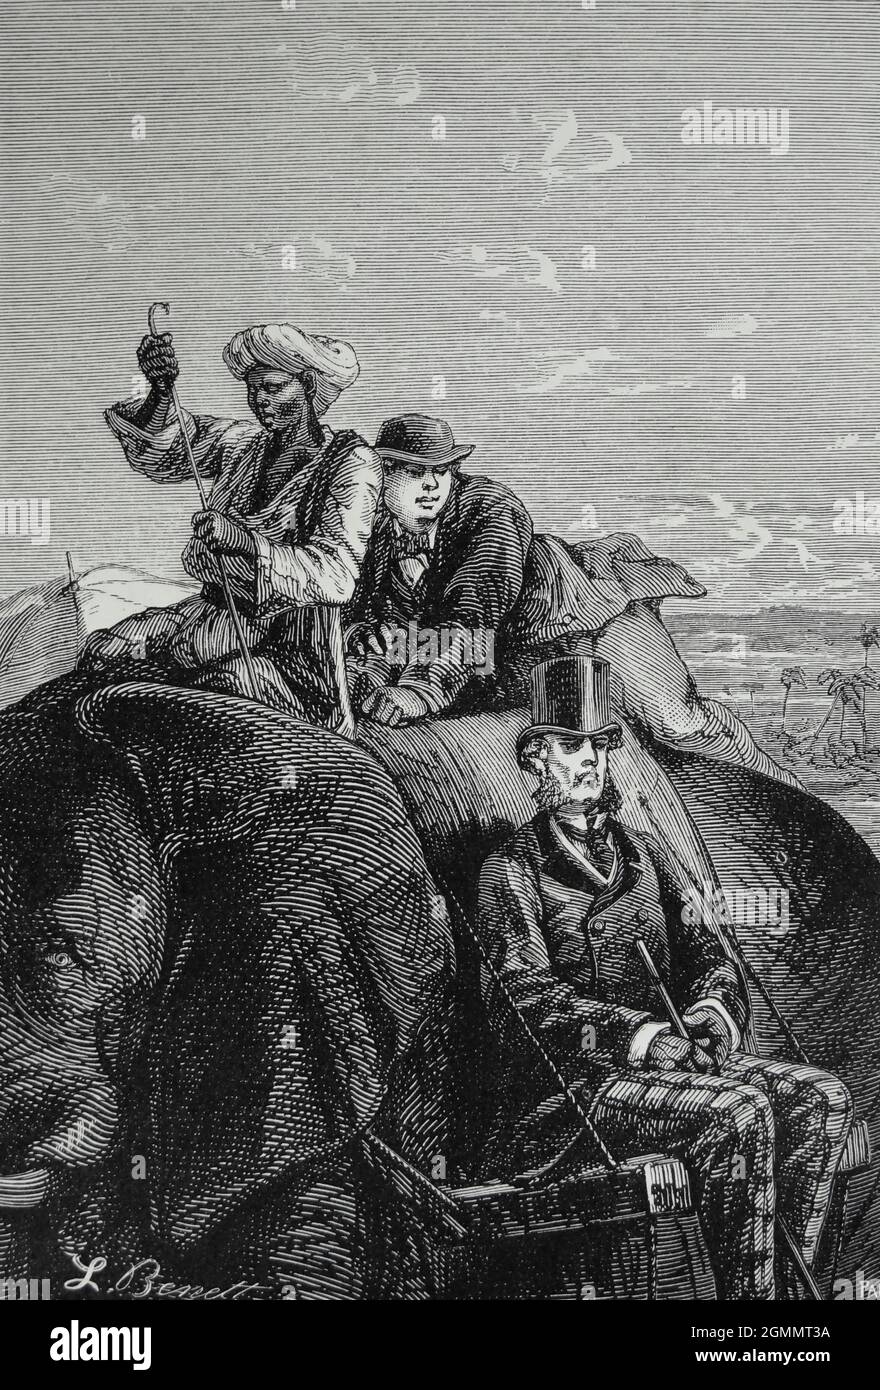 Passepartout's Uneasy Ride on the Back of the Elephant. from the book ' Around the world in eighty days ' by Jules Verne (1828-1905) Translated by Geo. M. Towle, Published in Boston by James. R. Osgood & Co. 1873 First US Edition Stock Photo